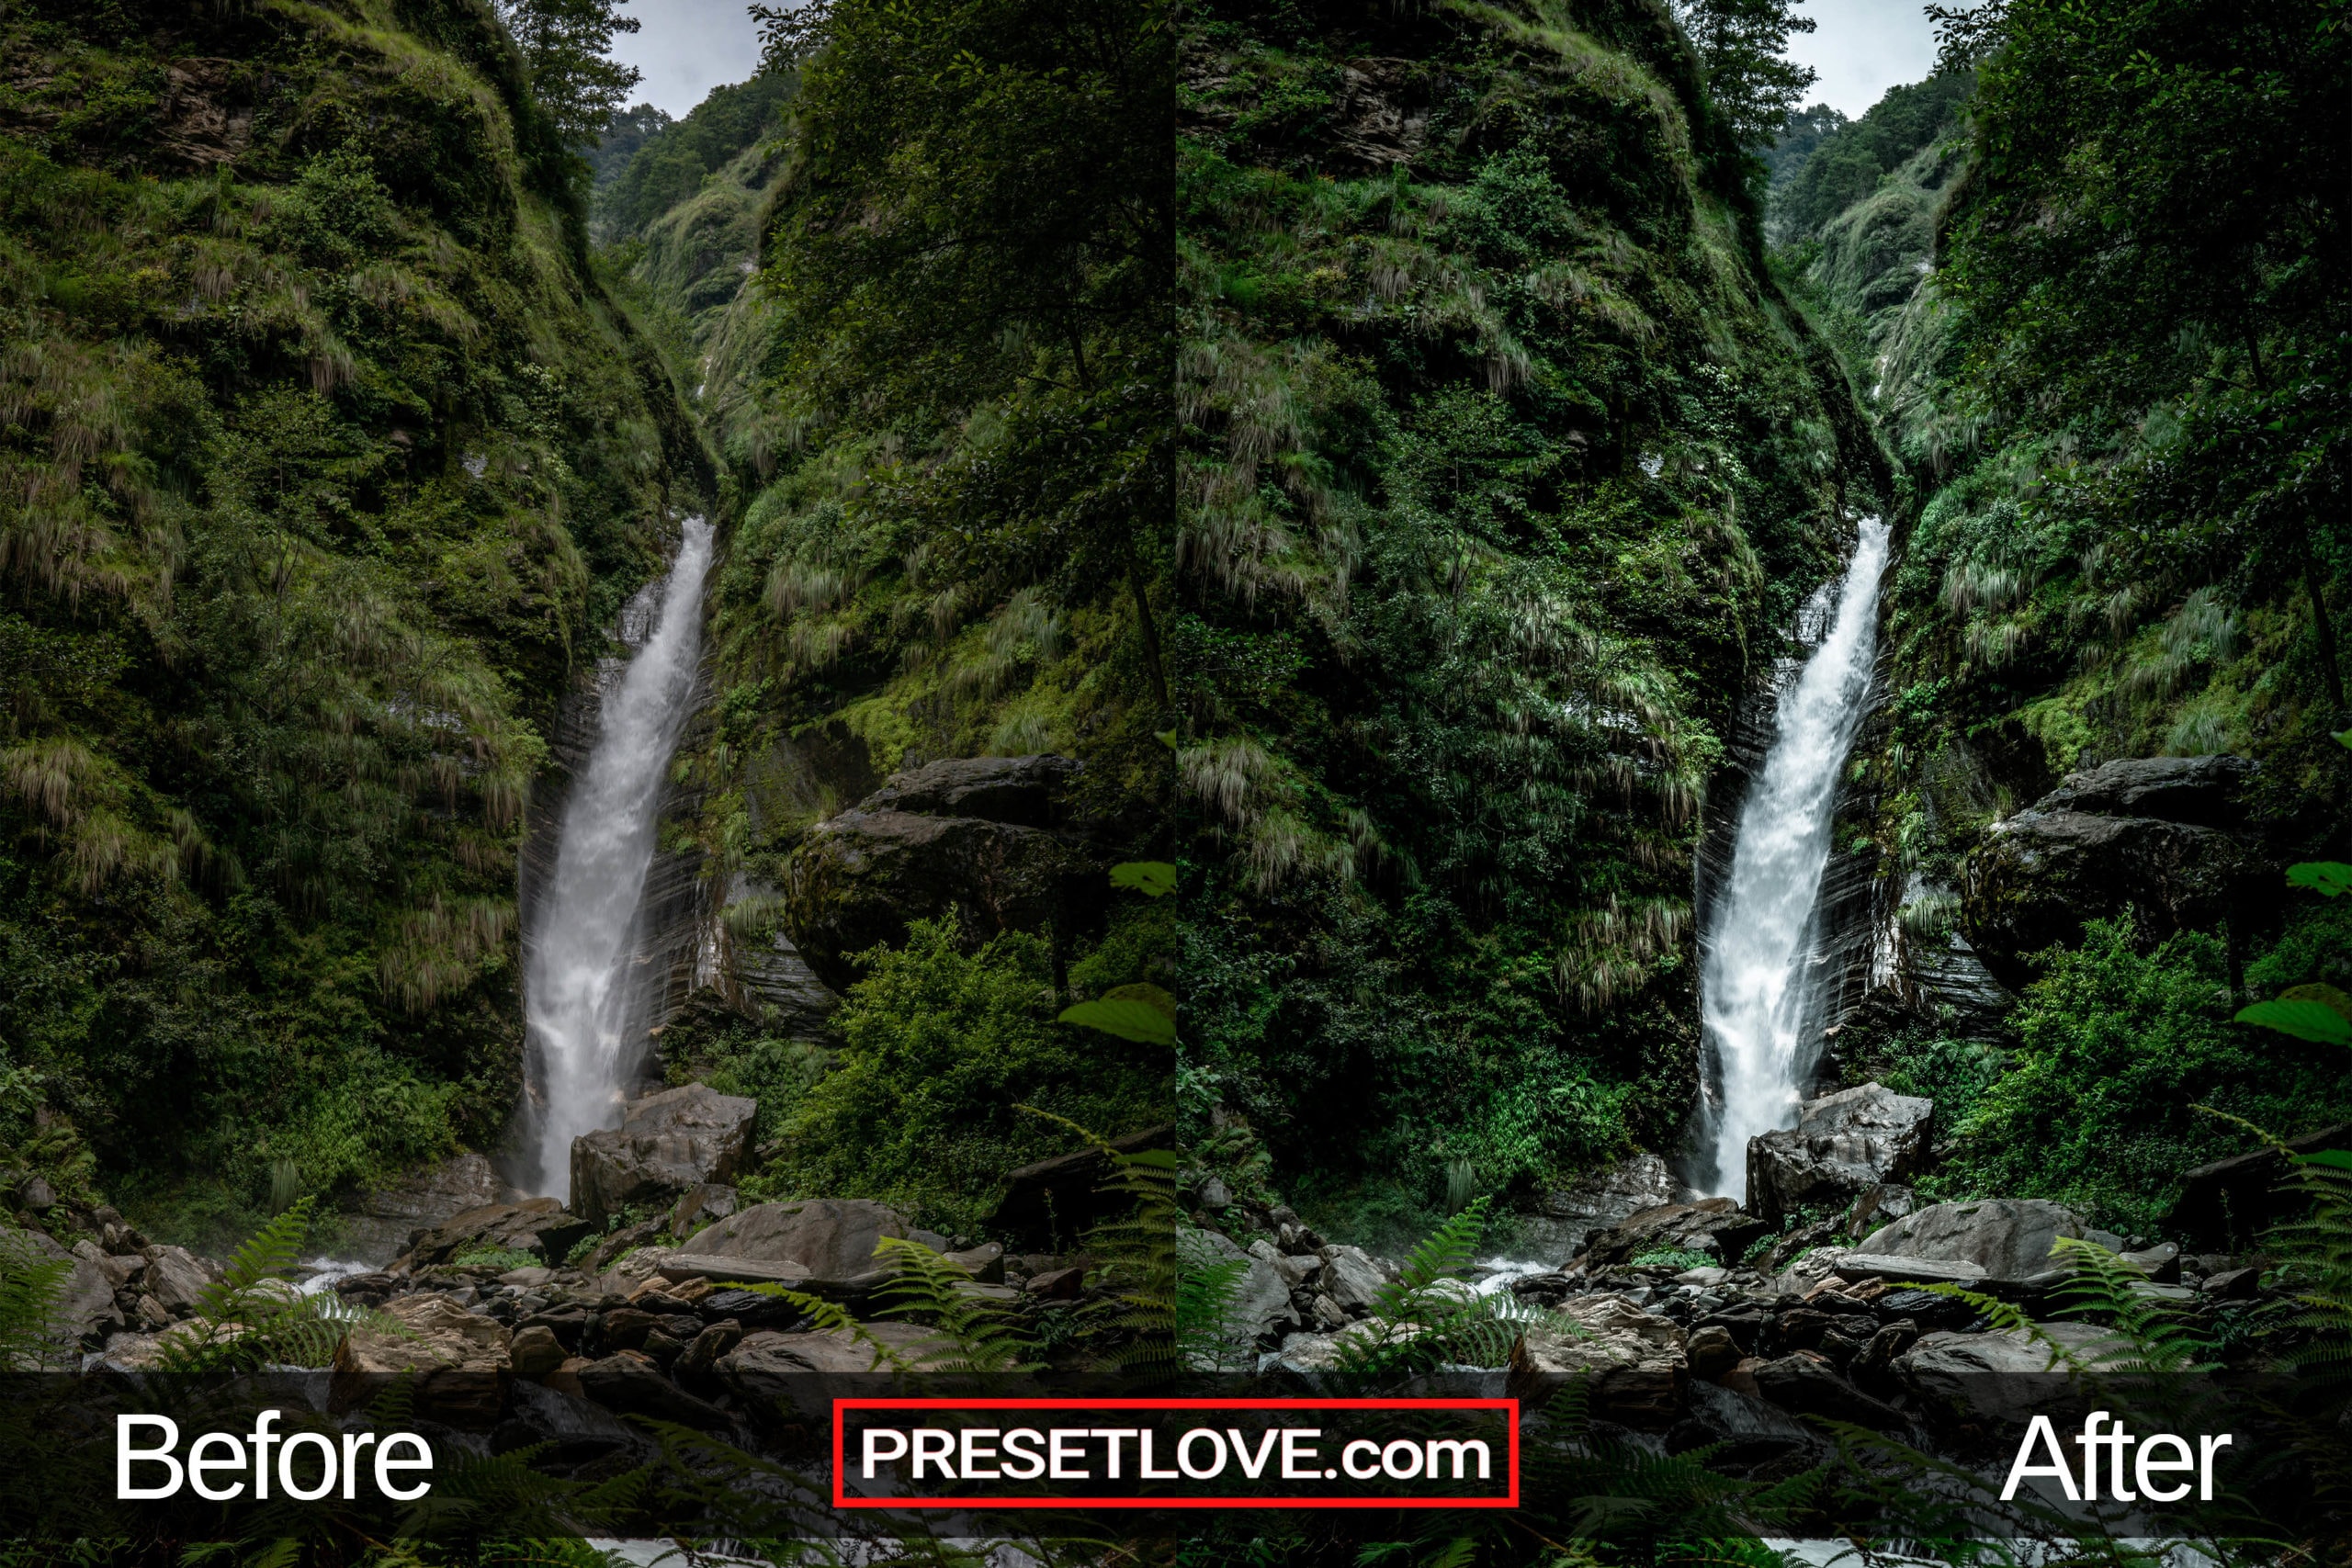 Transform your nature photos with PresetLove's 'Flora Falls' preset - a captivating edit that enhances the colors and details of flora and waterfalls, creating a breathtaking before and after comparison that showcases the beauty of nature.